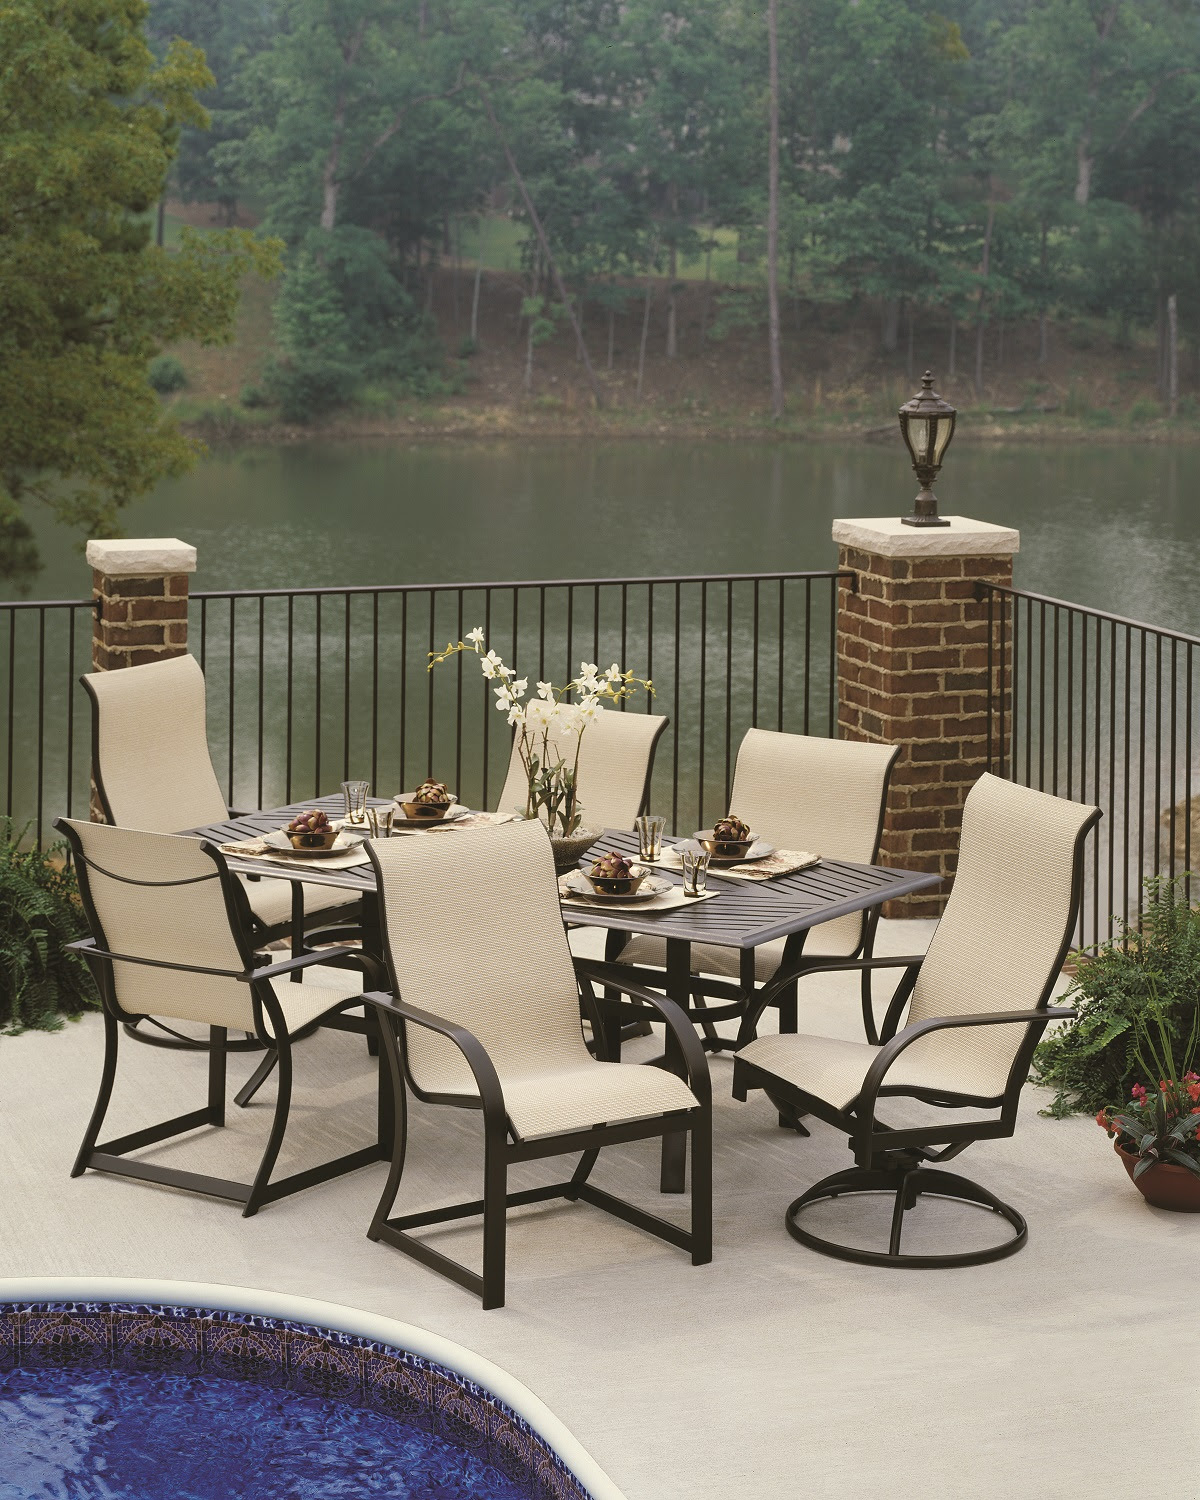 Aluminum patio furniture touch up paint - 20 Examples of ...